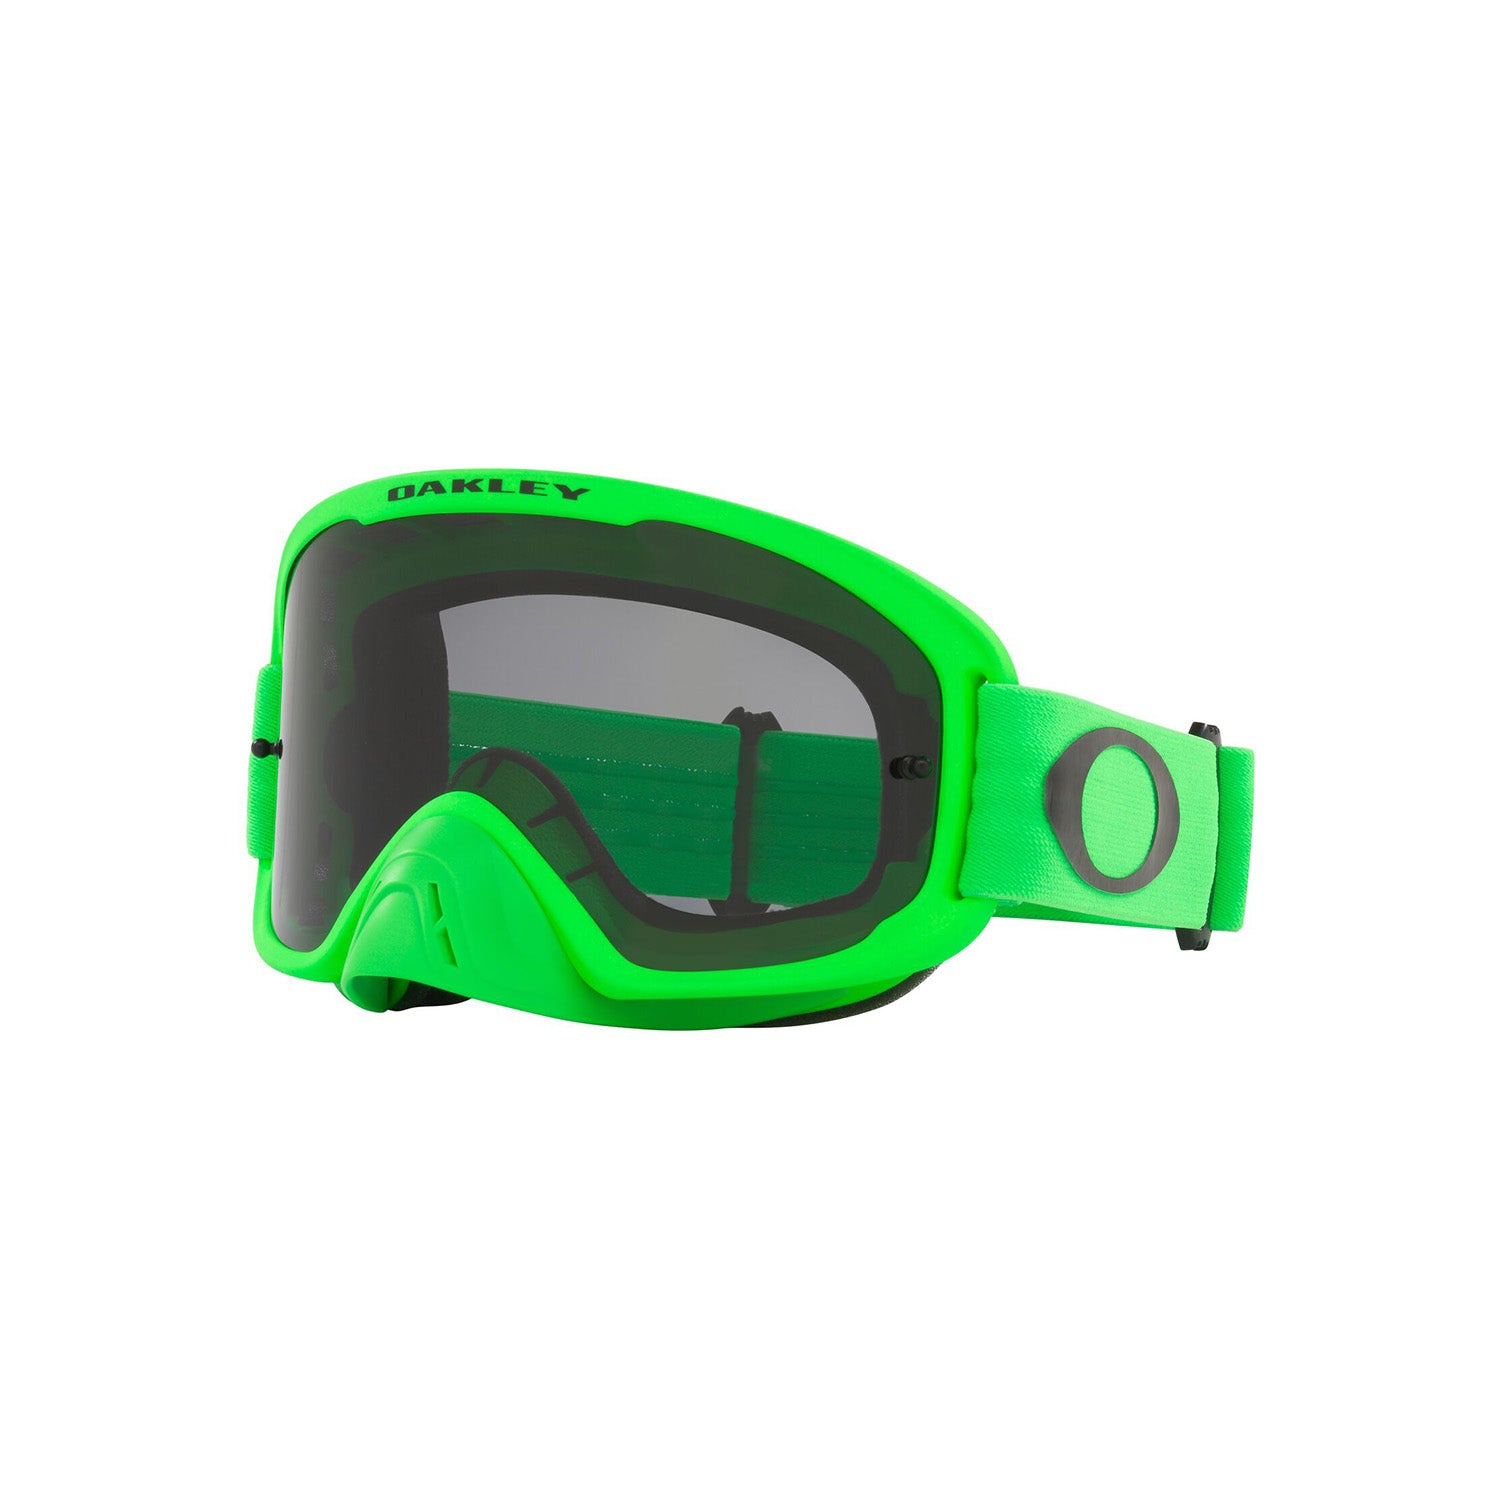 Oakley O Frame 2.0 Pro MX Goggle in Moto Green with Clear Lens